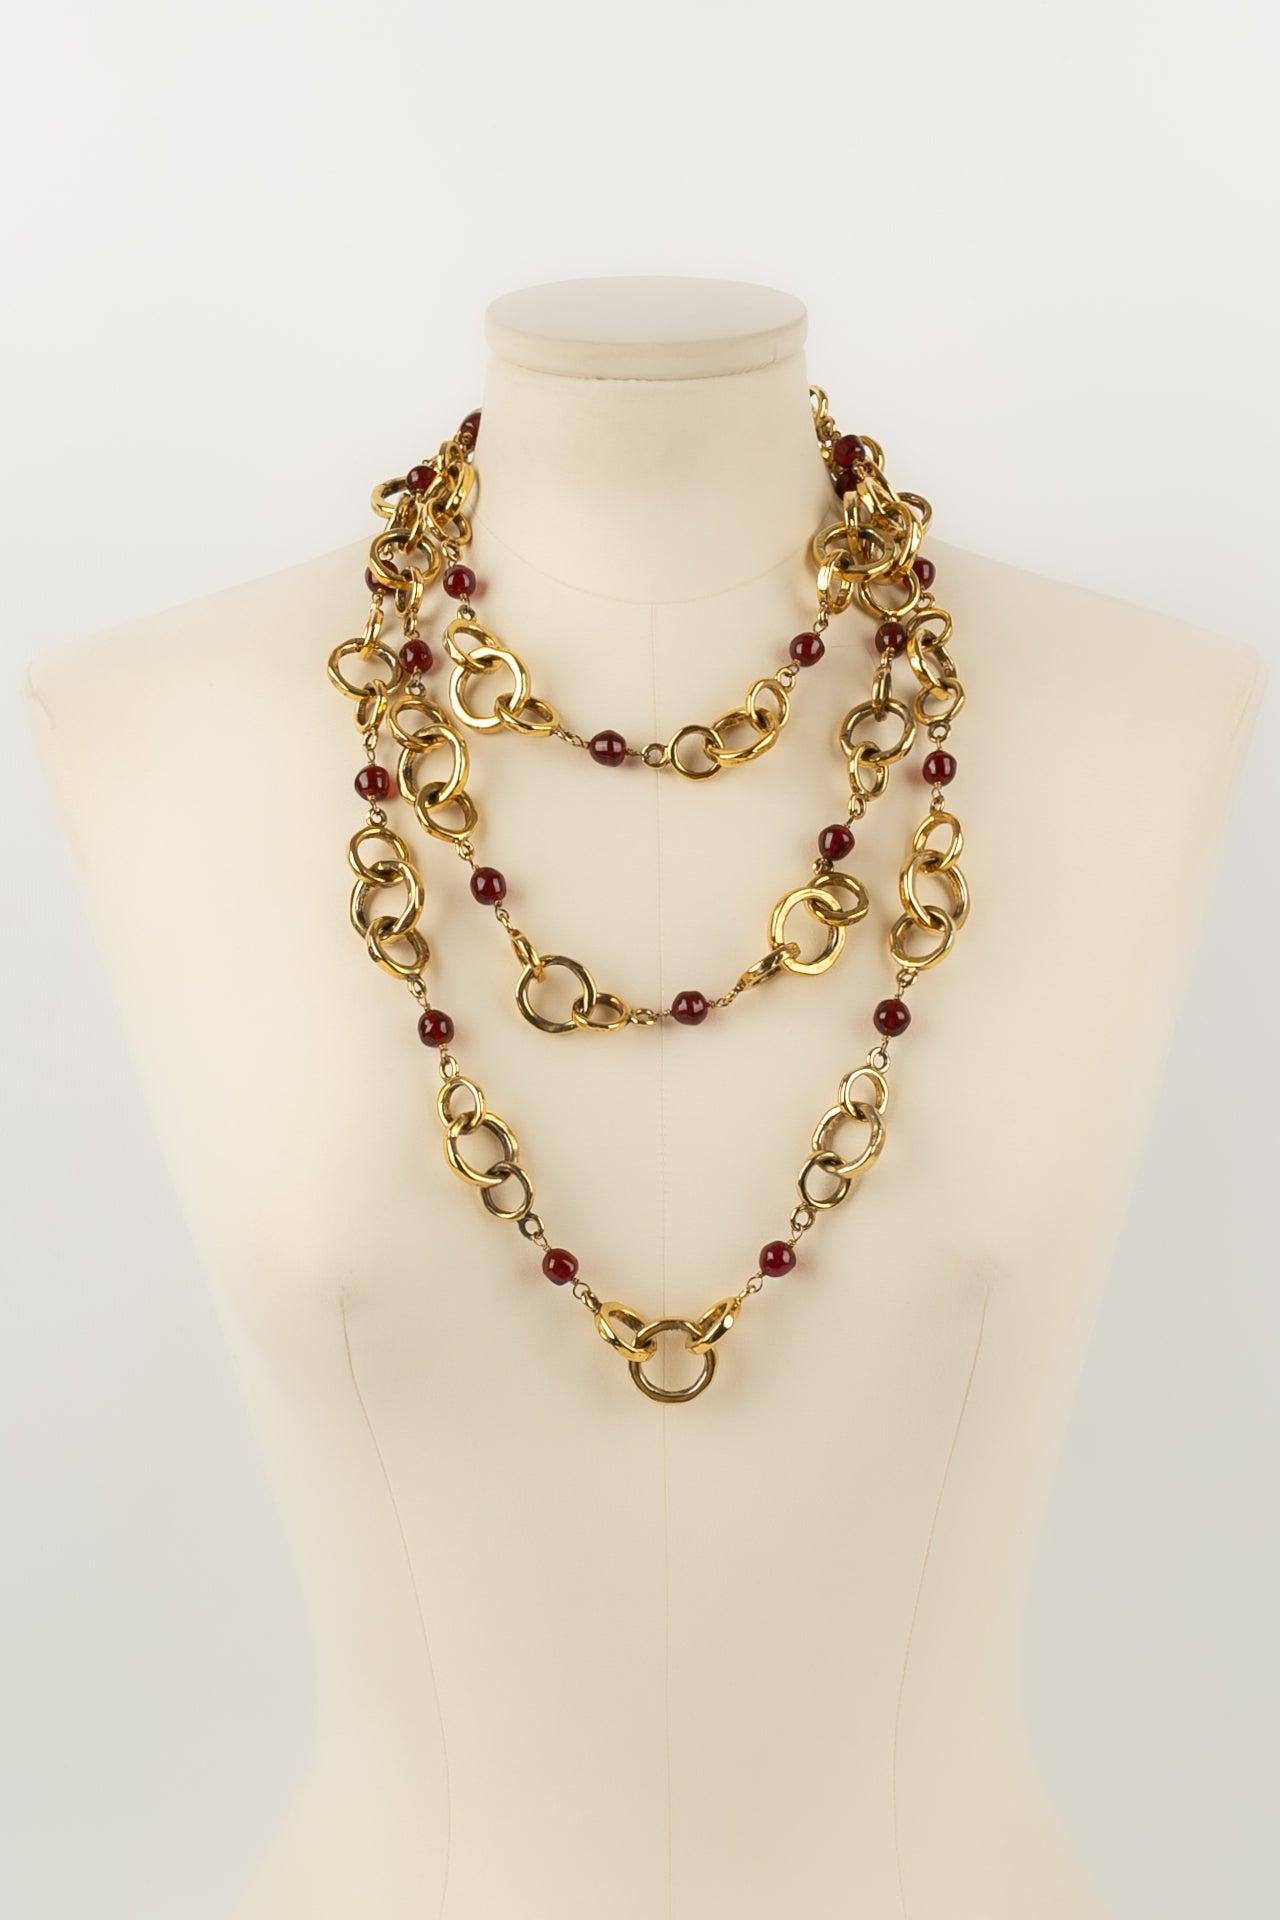 Chanel - Long necklace in gold metal and red glass beads. Collection 1984.

Additional information:
Dimensions: Length: 185 cm
Condition: Very good condition
Seller Ref number: CB138